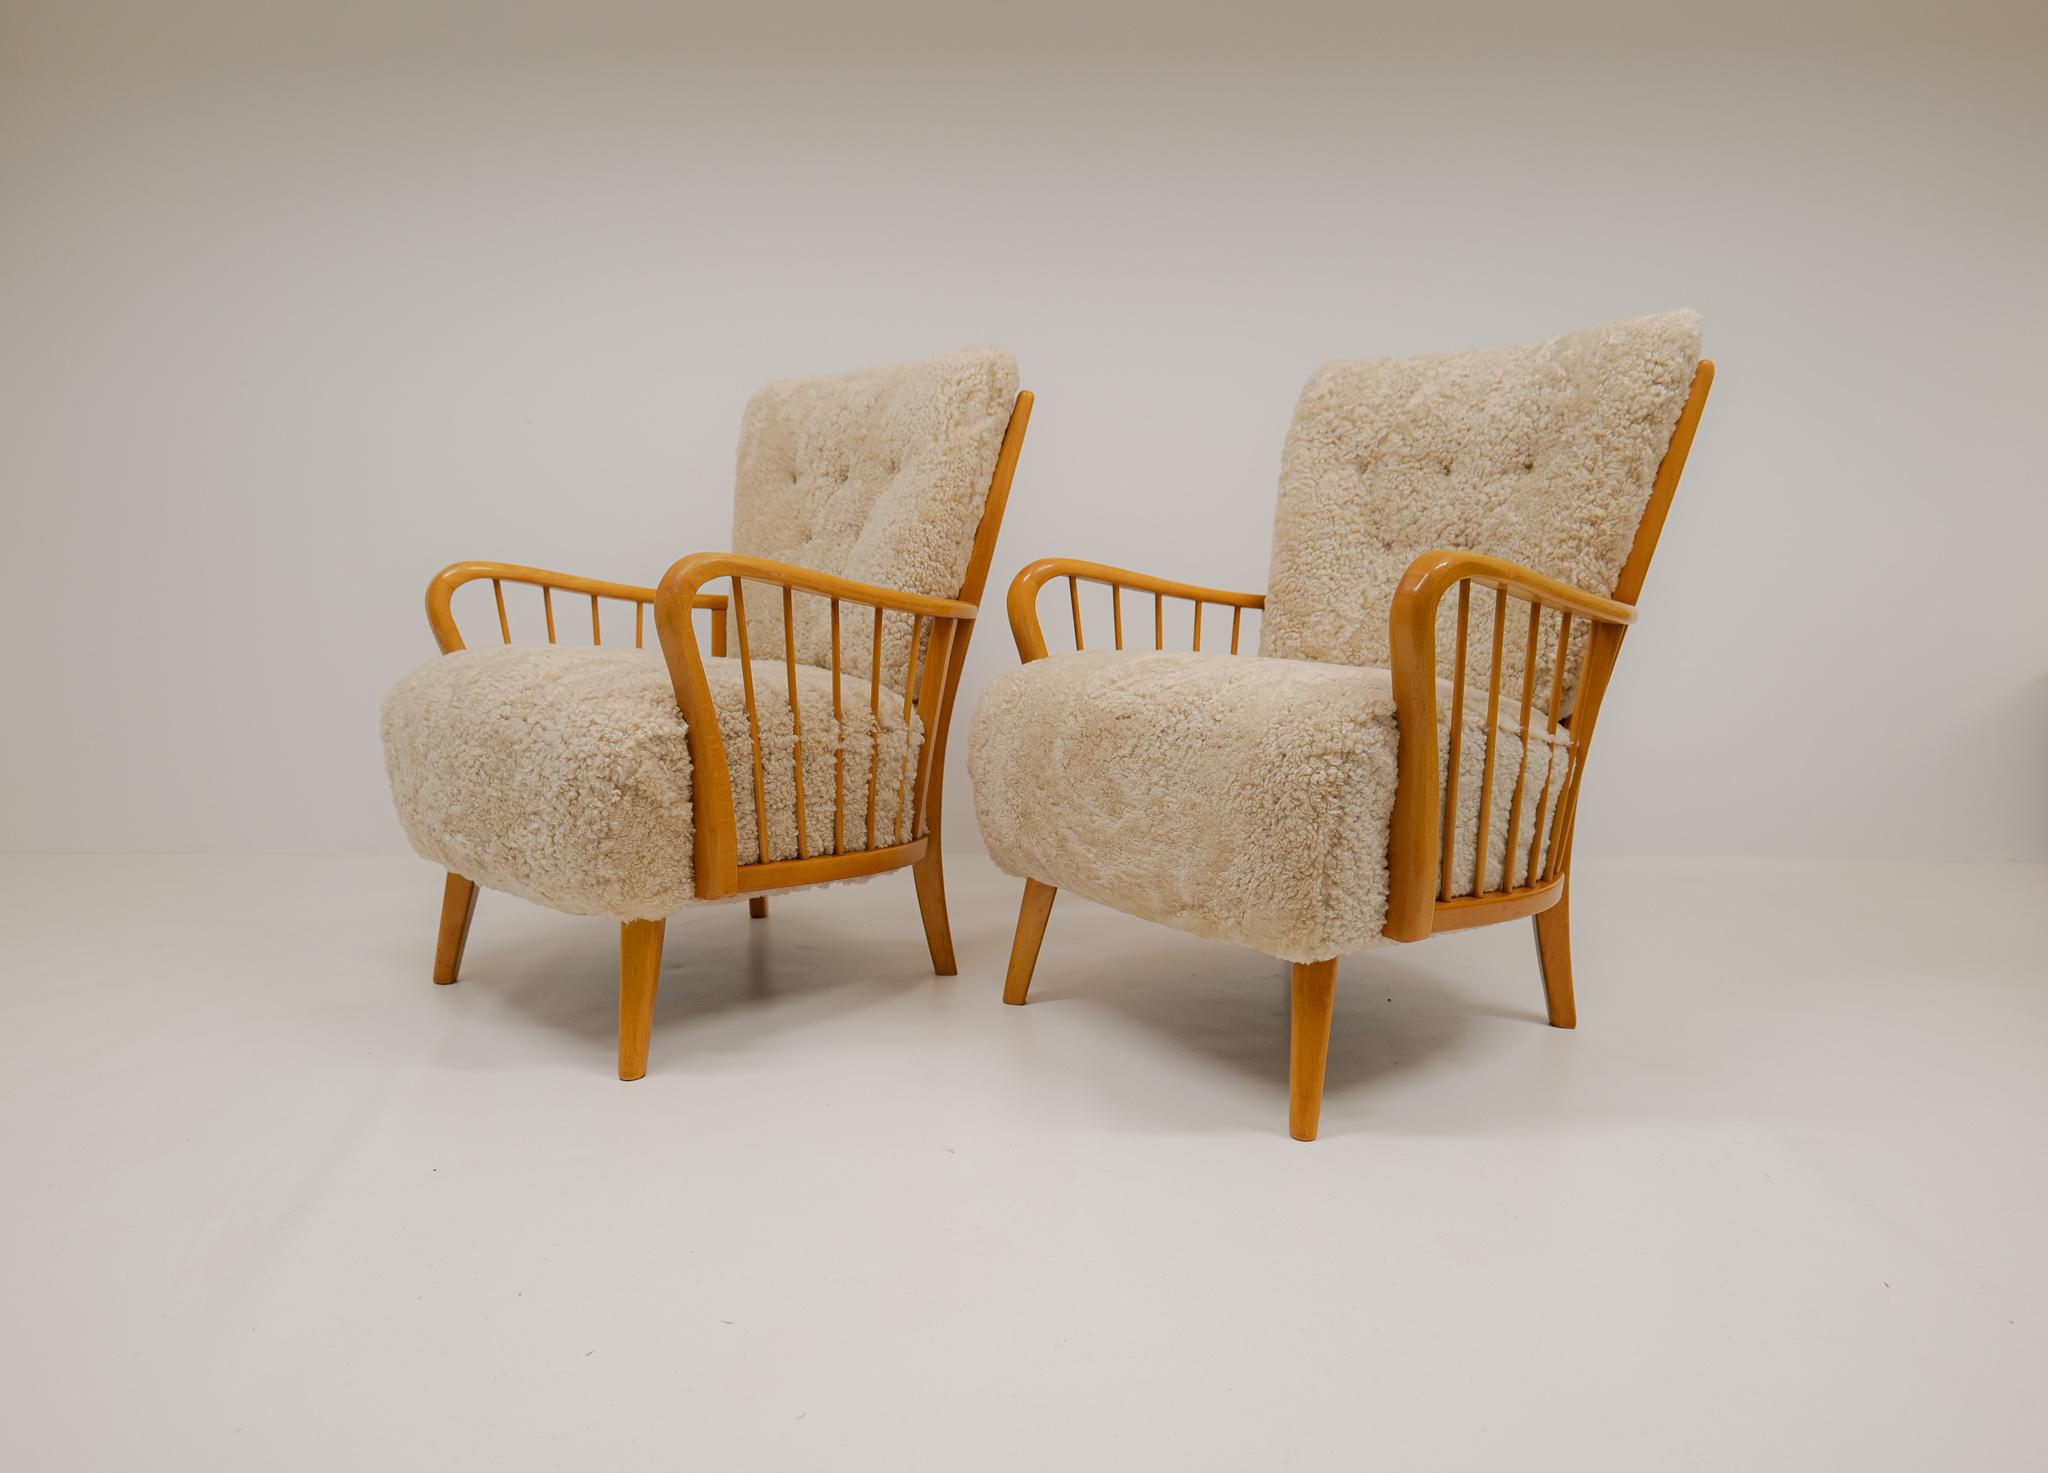 Art Deco Swedish Grace Lounge Chairs in Shearling / Sheepskin 1940s Sweden In Good Condition For Sale In Hillringsberg, SE